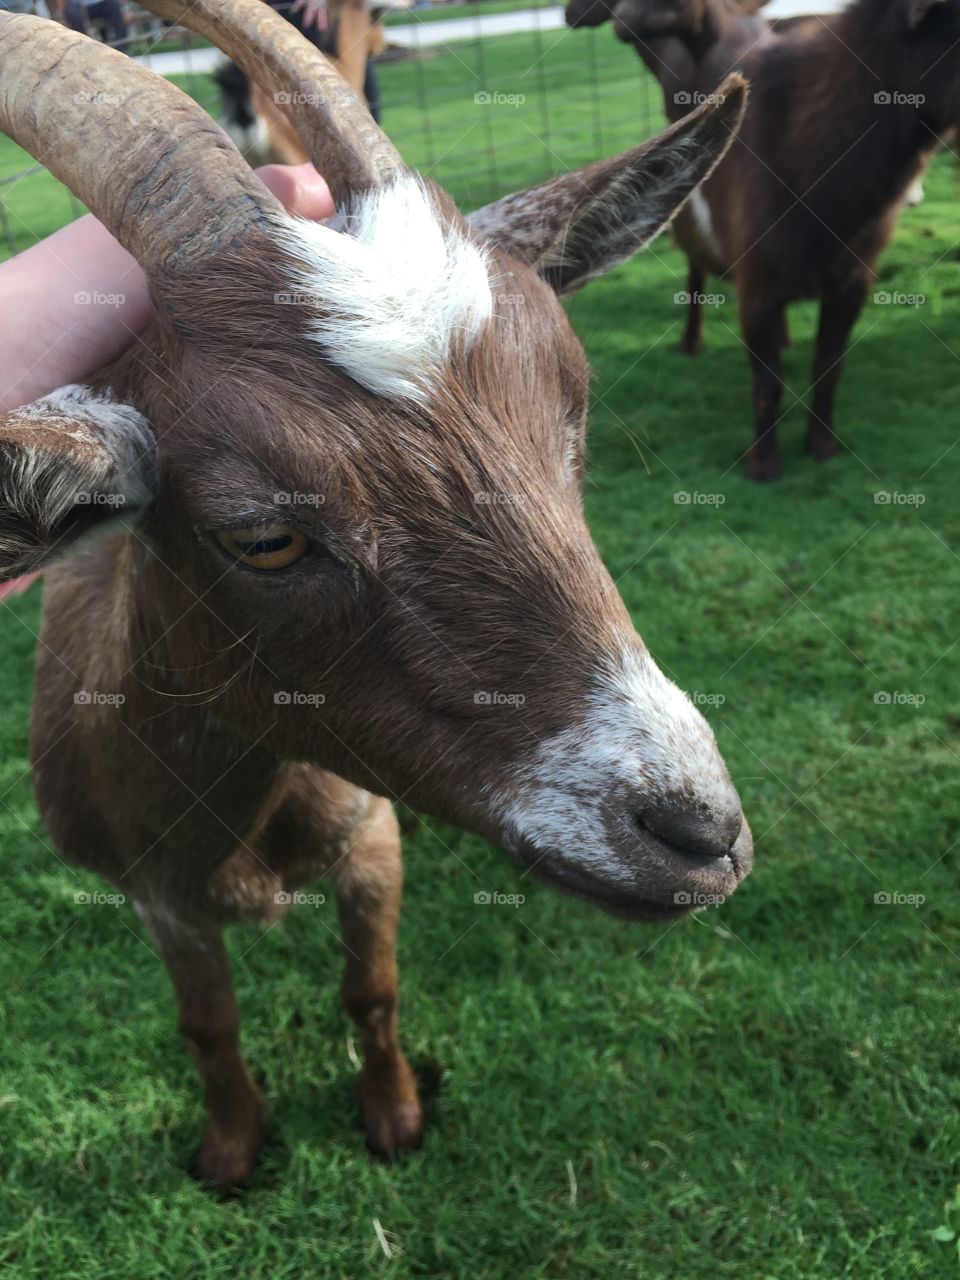 I went to a Billy Goat Ice Cream “yoga with goats” event. 